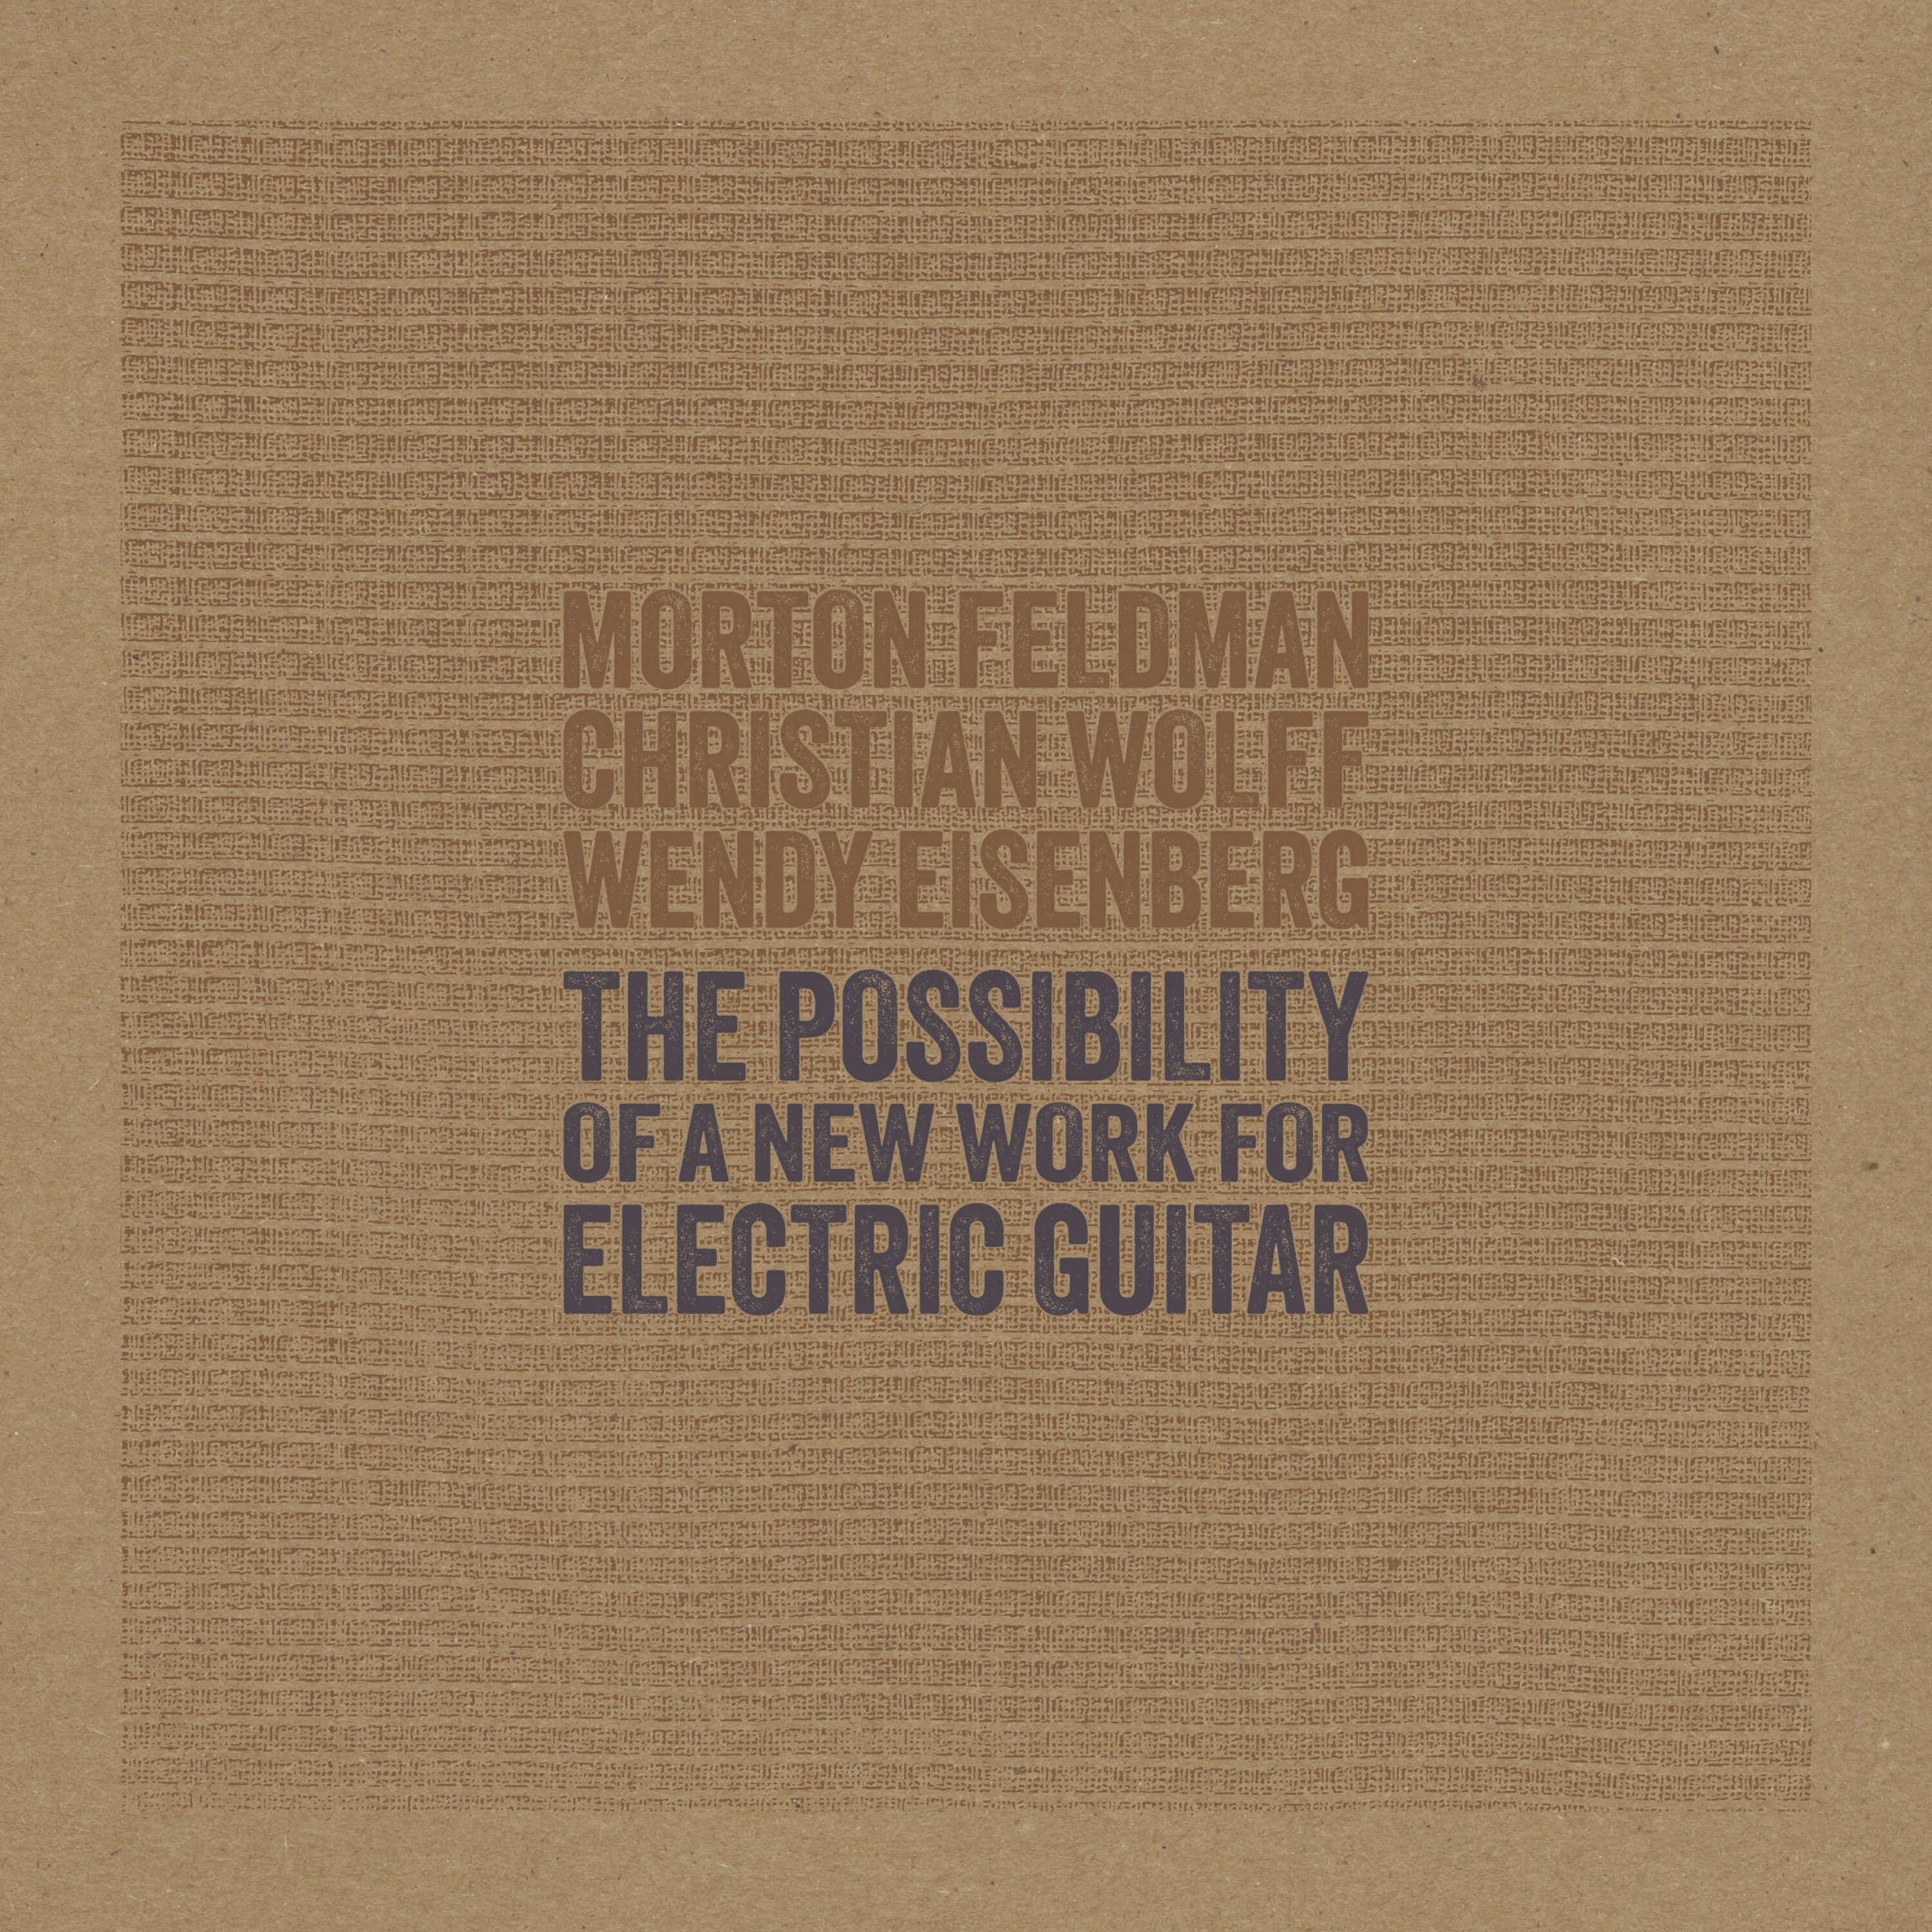 Morton Feldman Christian Wolff Wendy Eisenberg The Possibility of a New Work for Electric Guitar